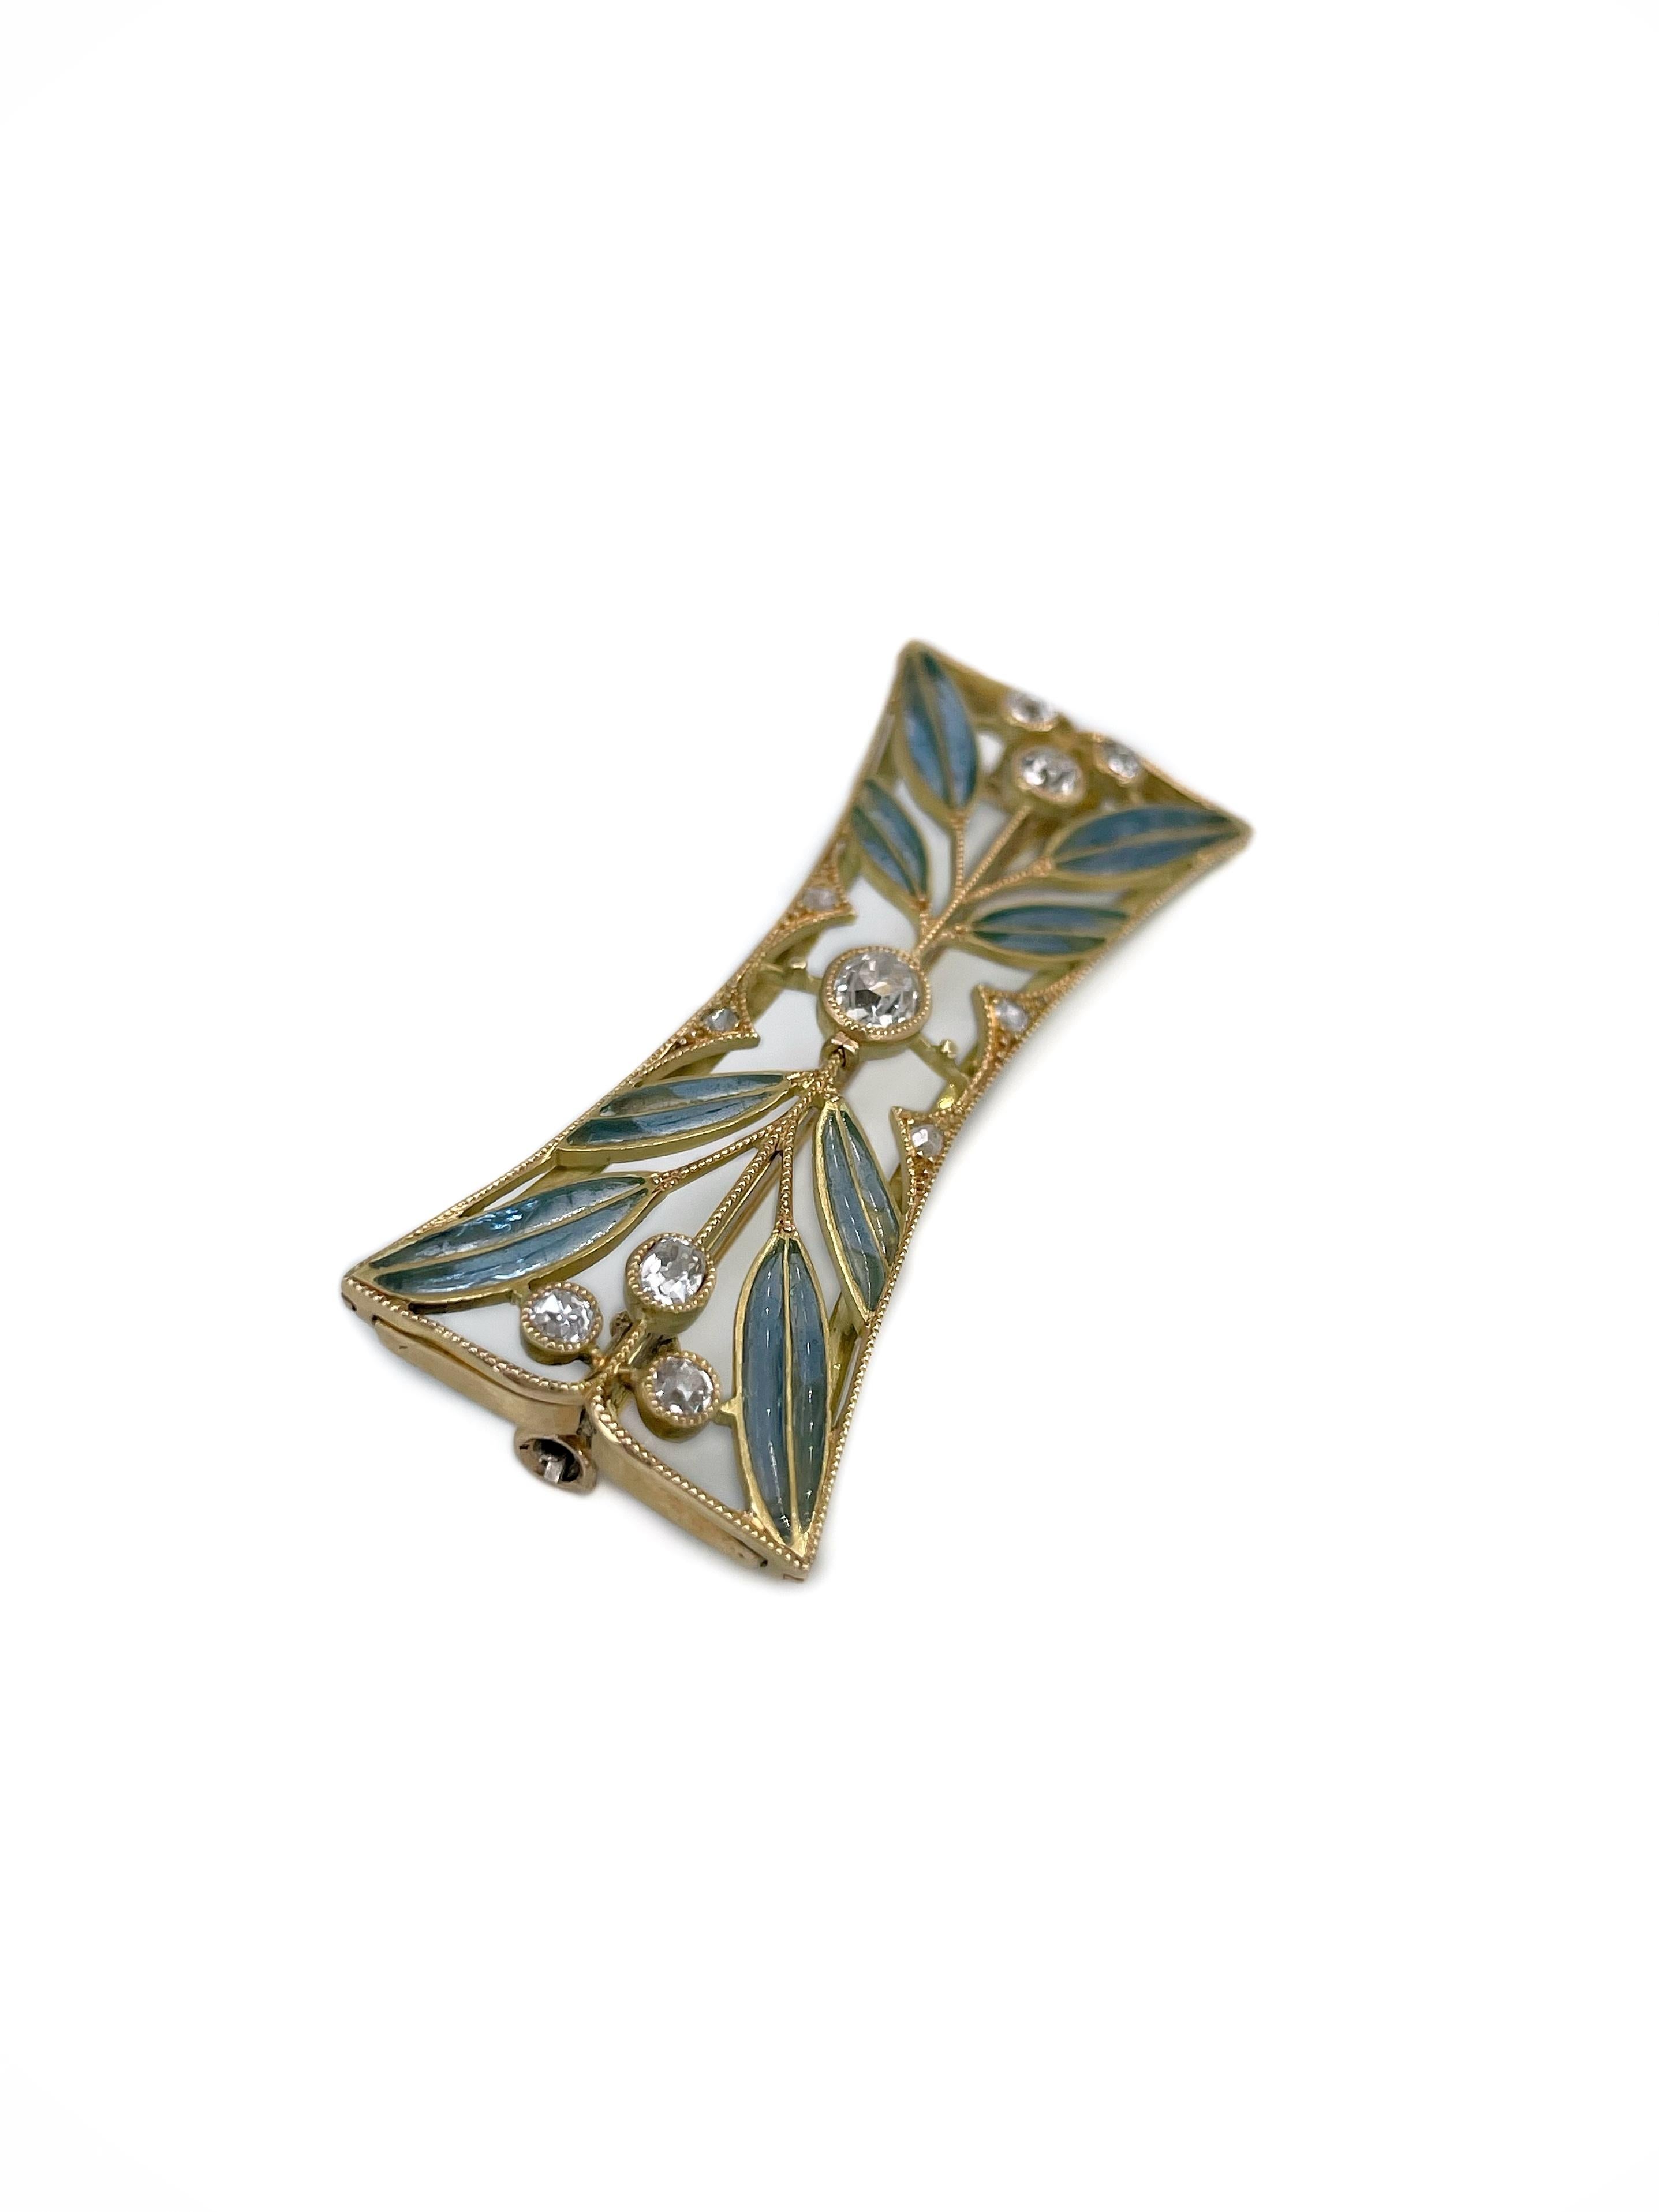 This is a lovely Art Nouveau floral motif pin brooch crafted in 18K yellow gold. Circa 1900.

The piece features old mine and rose cut diamonds. It is adorned with plique-à-jour enamel. 

Has a safe trombone clasp.

Weight: 7.60g
Length: 4.6cm
Width